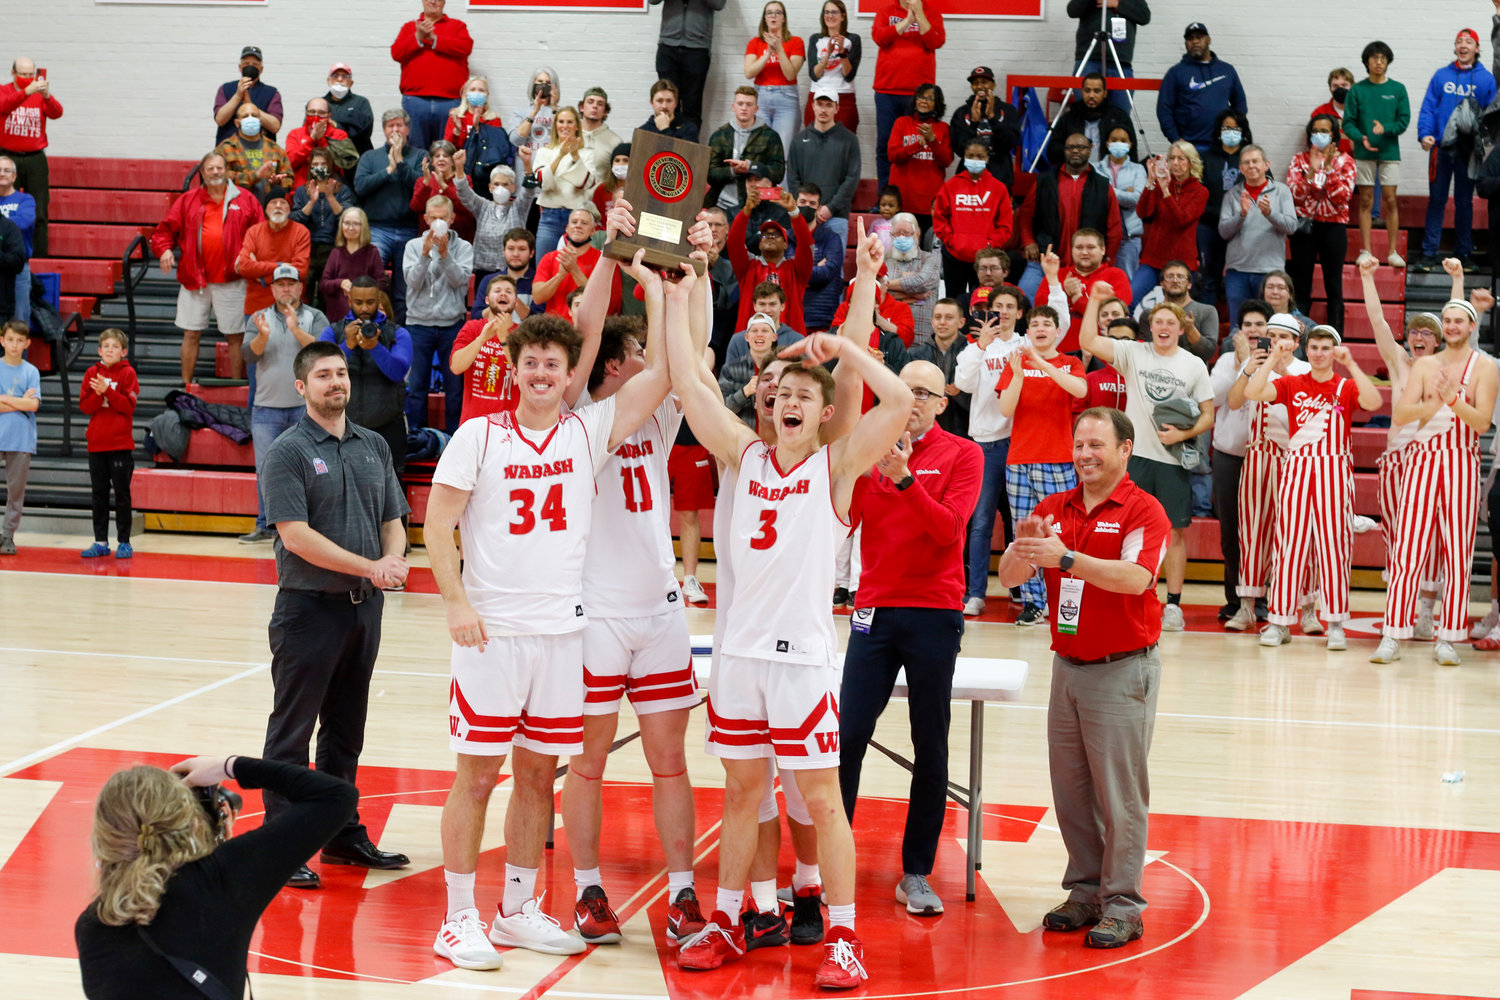 Wabash will graduate four seniors in Jack Davidson, Tyler Watson, Kellen Schreiber, and Jack Hegwood. The group will do down in Little Giants history as one of the best senior classes to come through the program